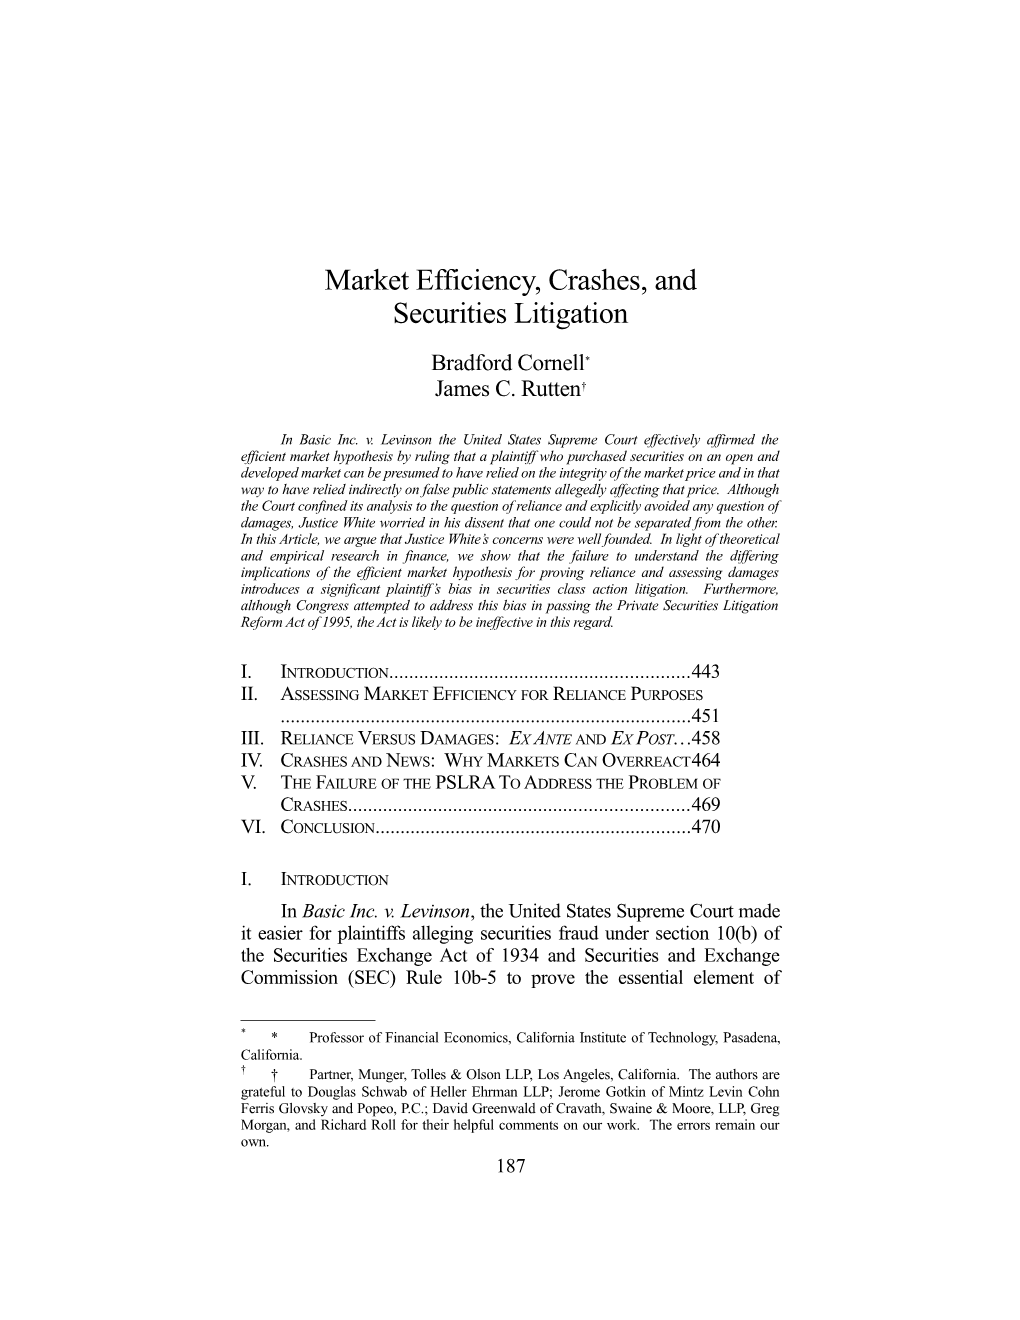 Market Efficiency, Crashes, and Securities Litigation